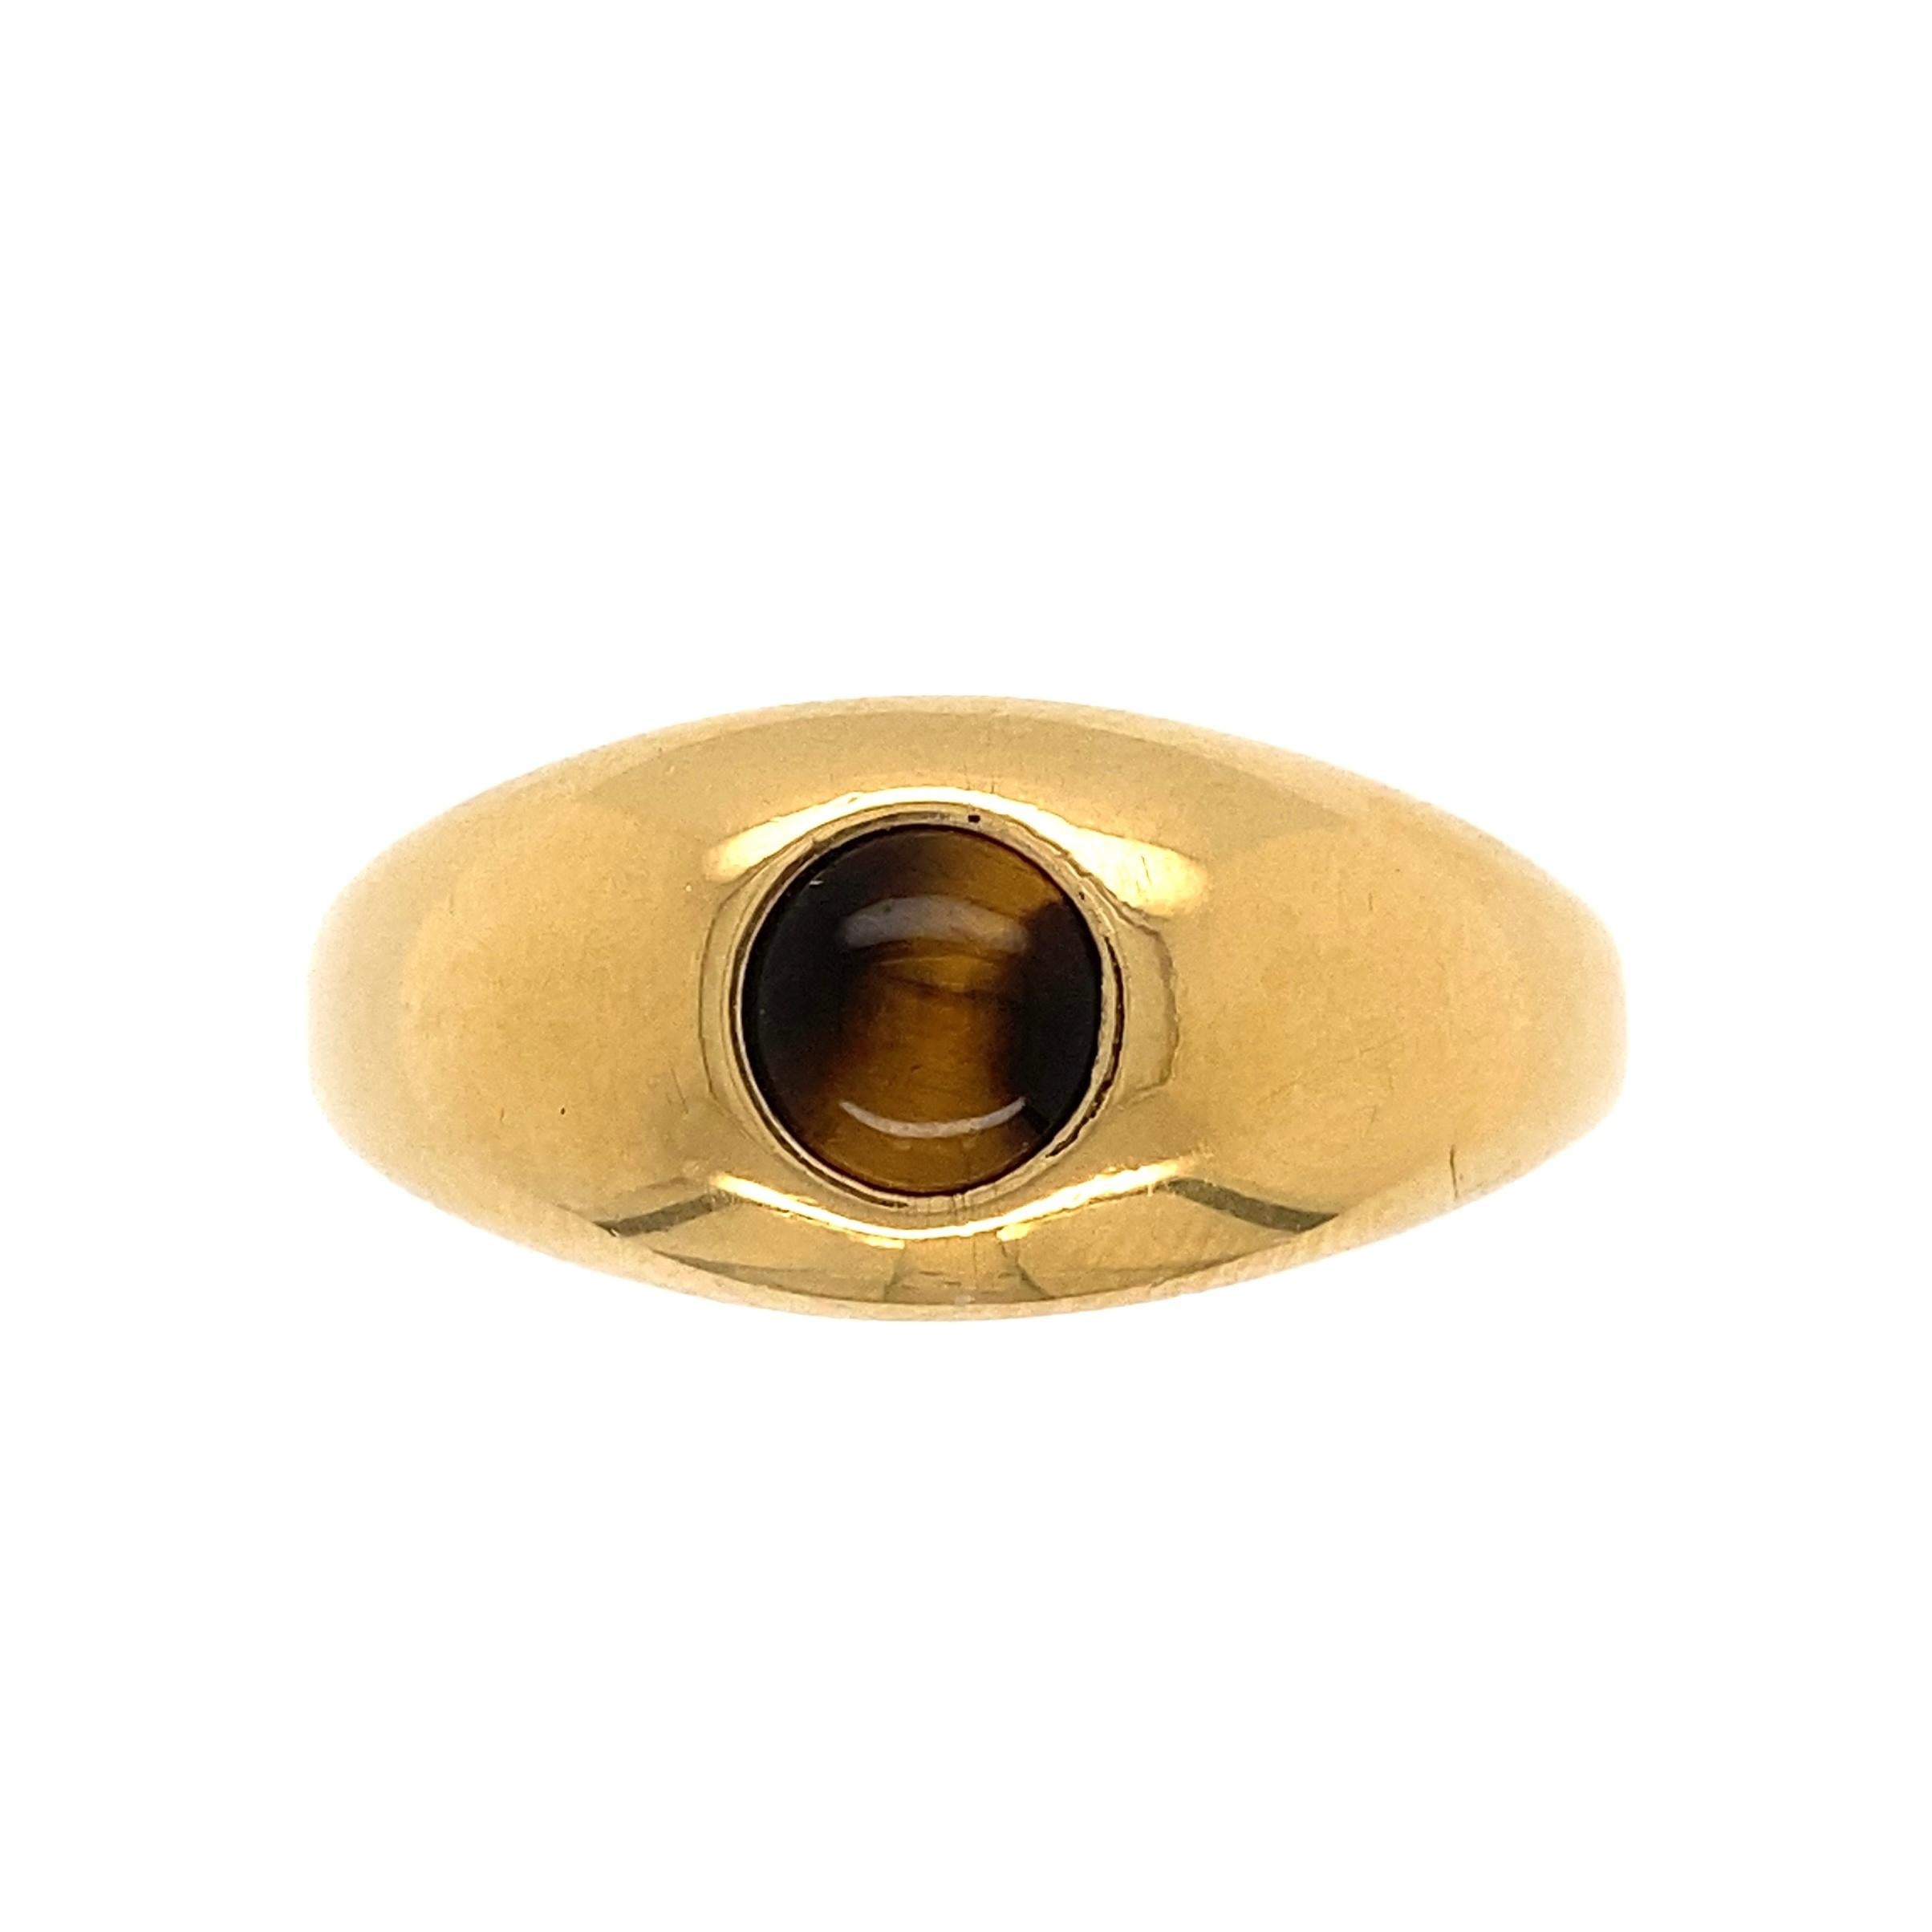 Handsome Fine Quality Gent’s Tiger Eye Gold Signet Ring. Securely set with a Round Tiger Eye, hand crafted 18 Karat Yellow Gold mounting. Ring size 13, we offer ring re-sizing. Dimensions 1.16” x 1.00” x 0.43” h. In excellent condition, recently